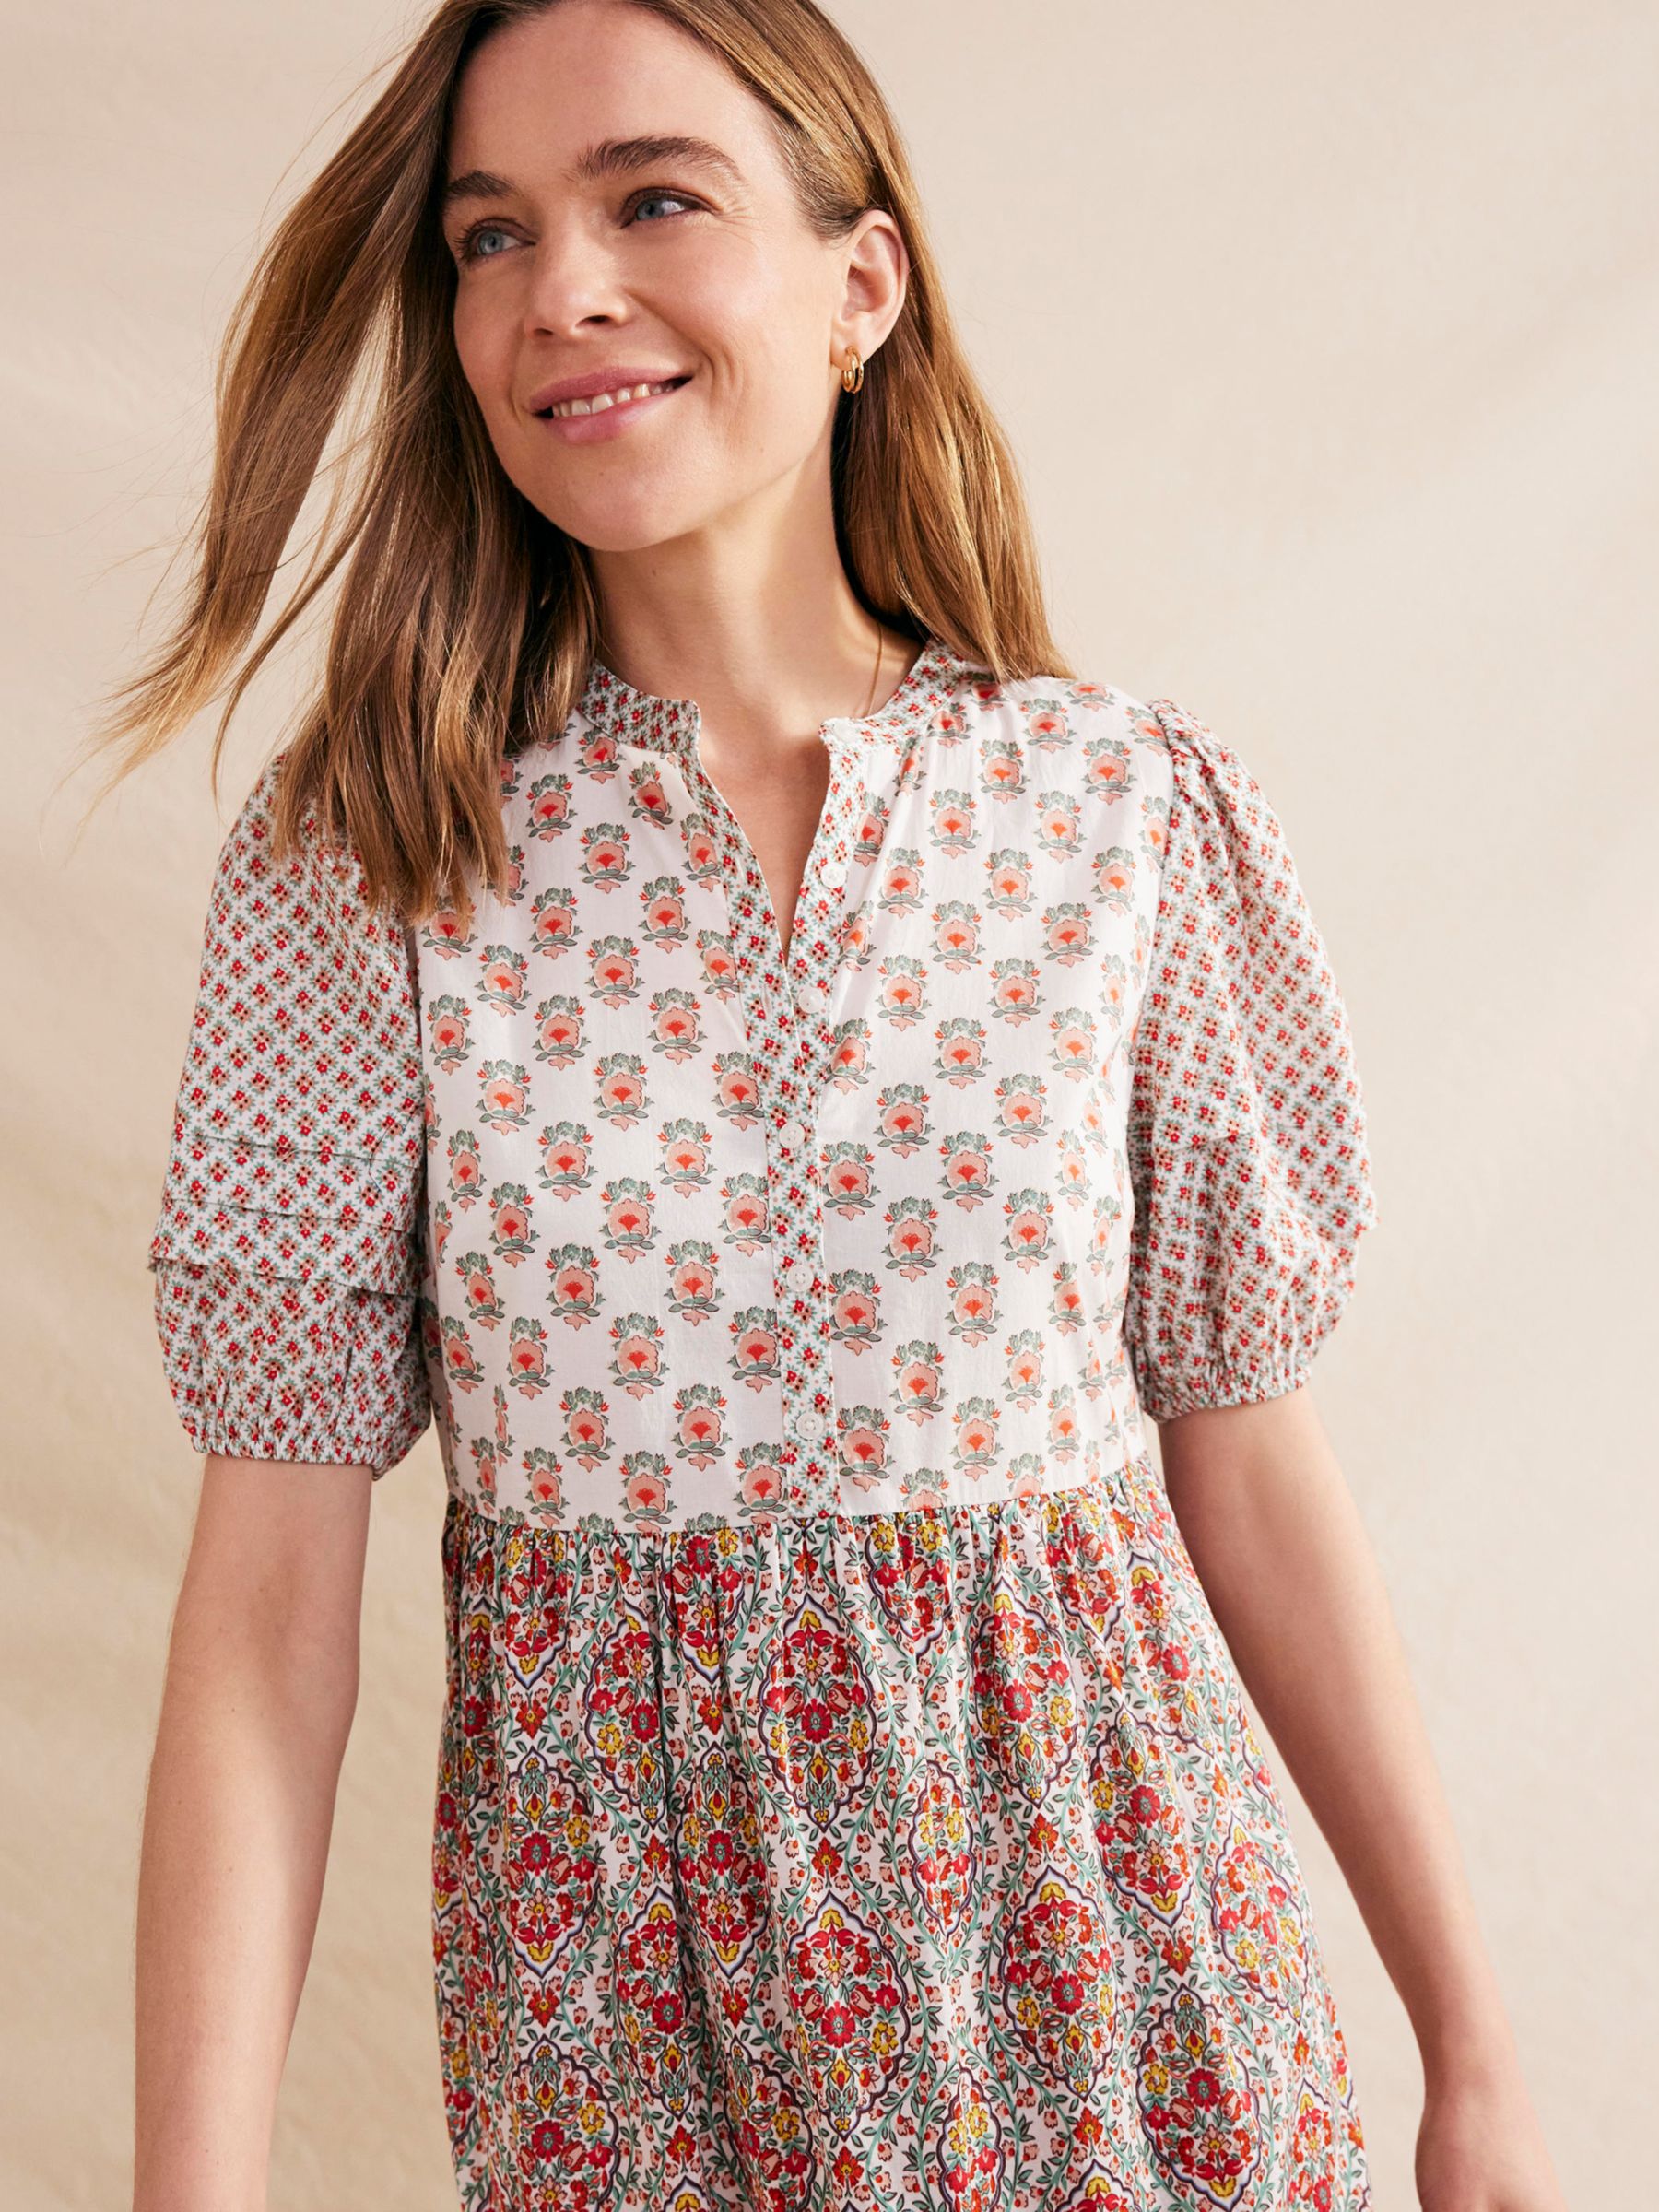 Perfect dresses for spring and summer celebrations